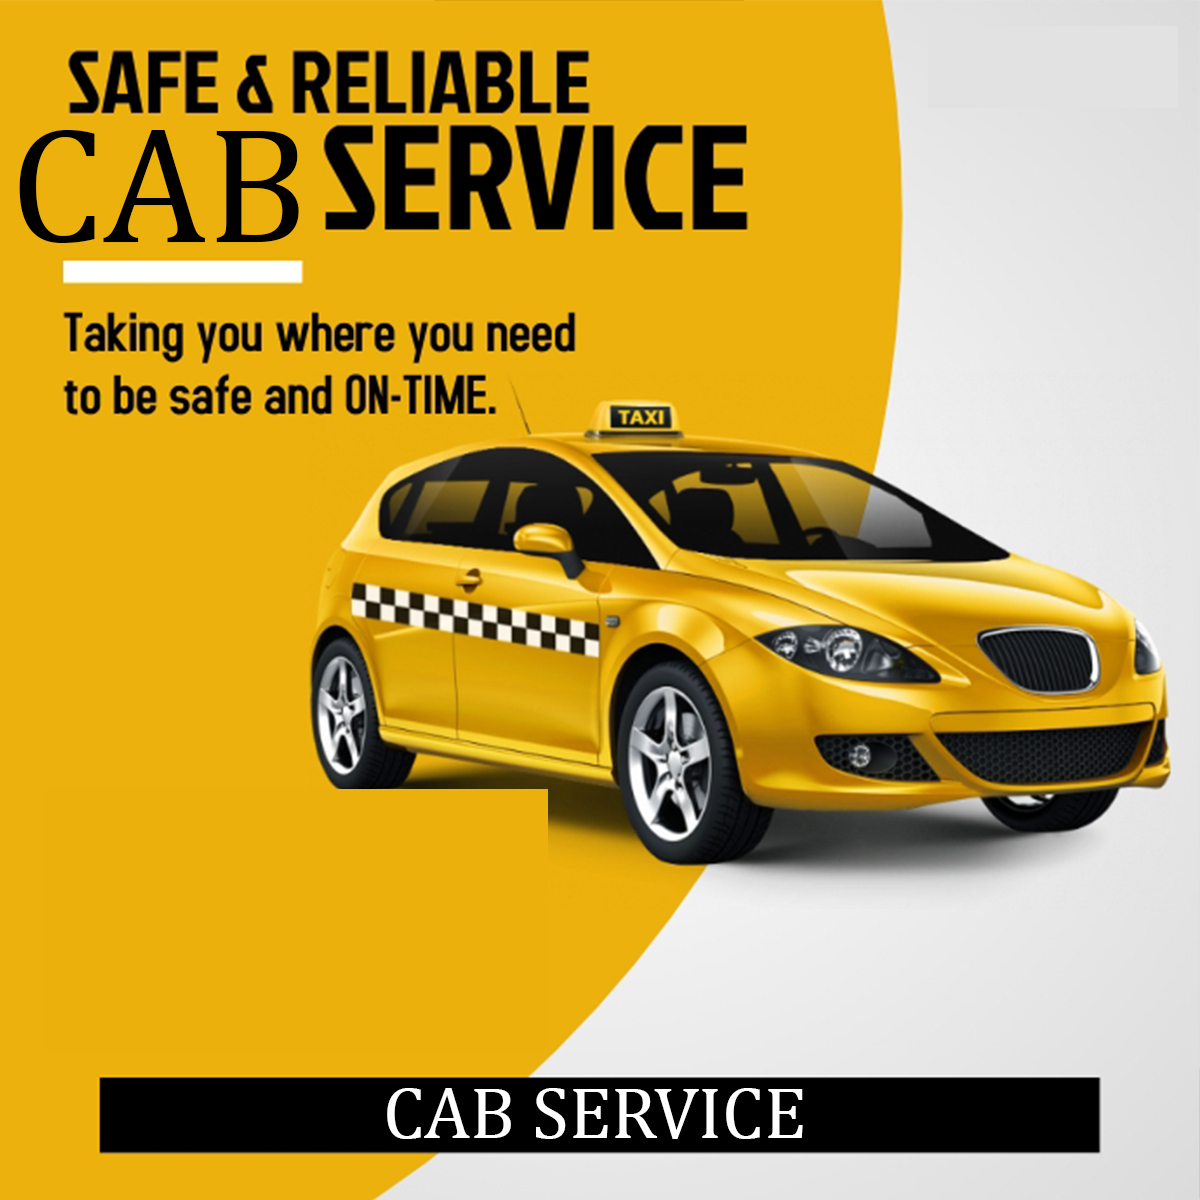 Cab Services In Airport T3